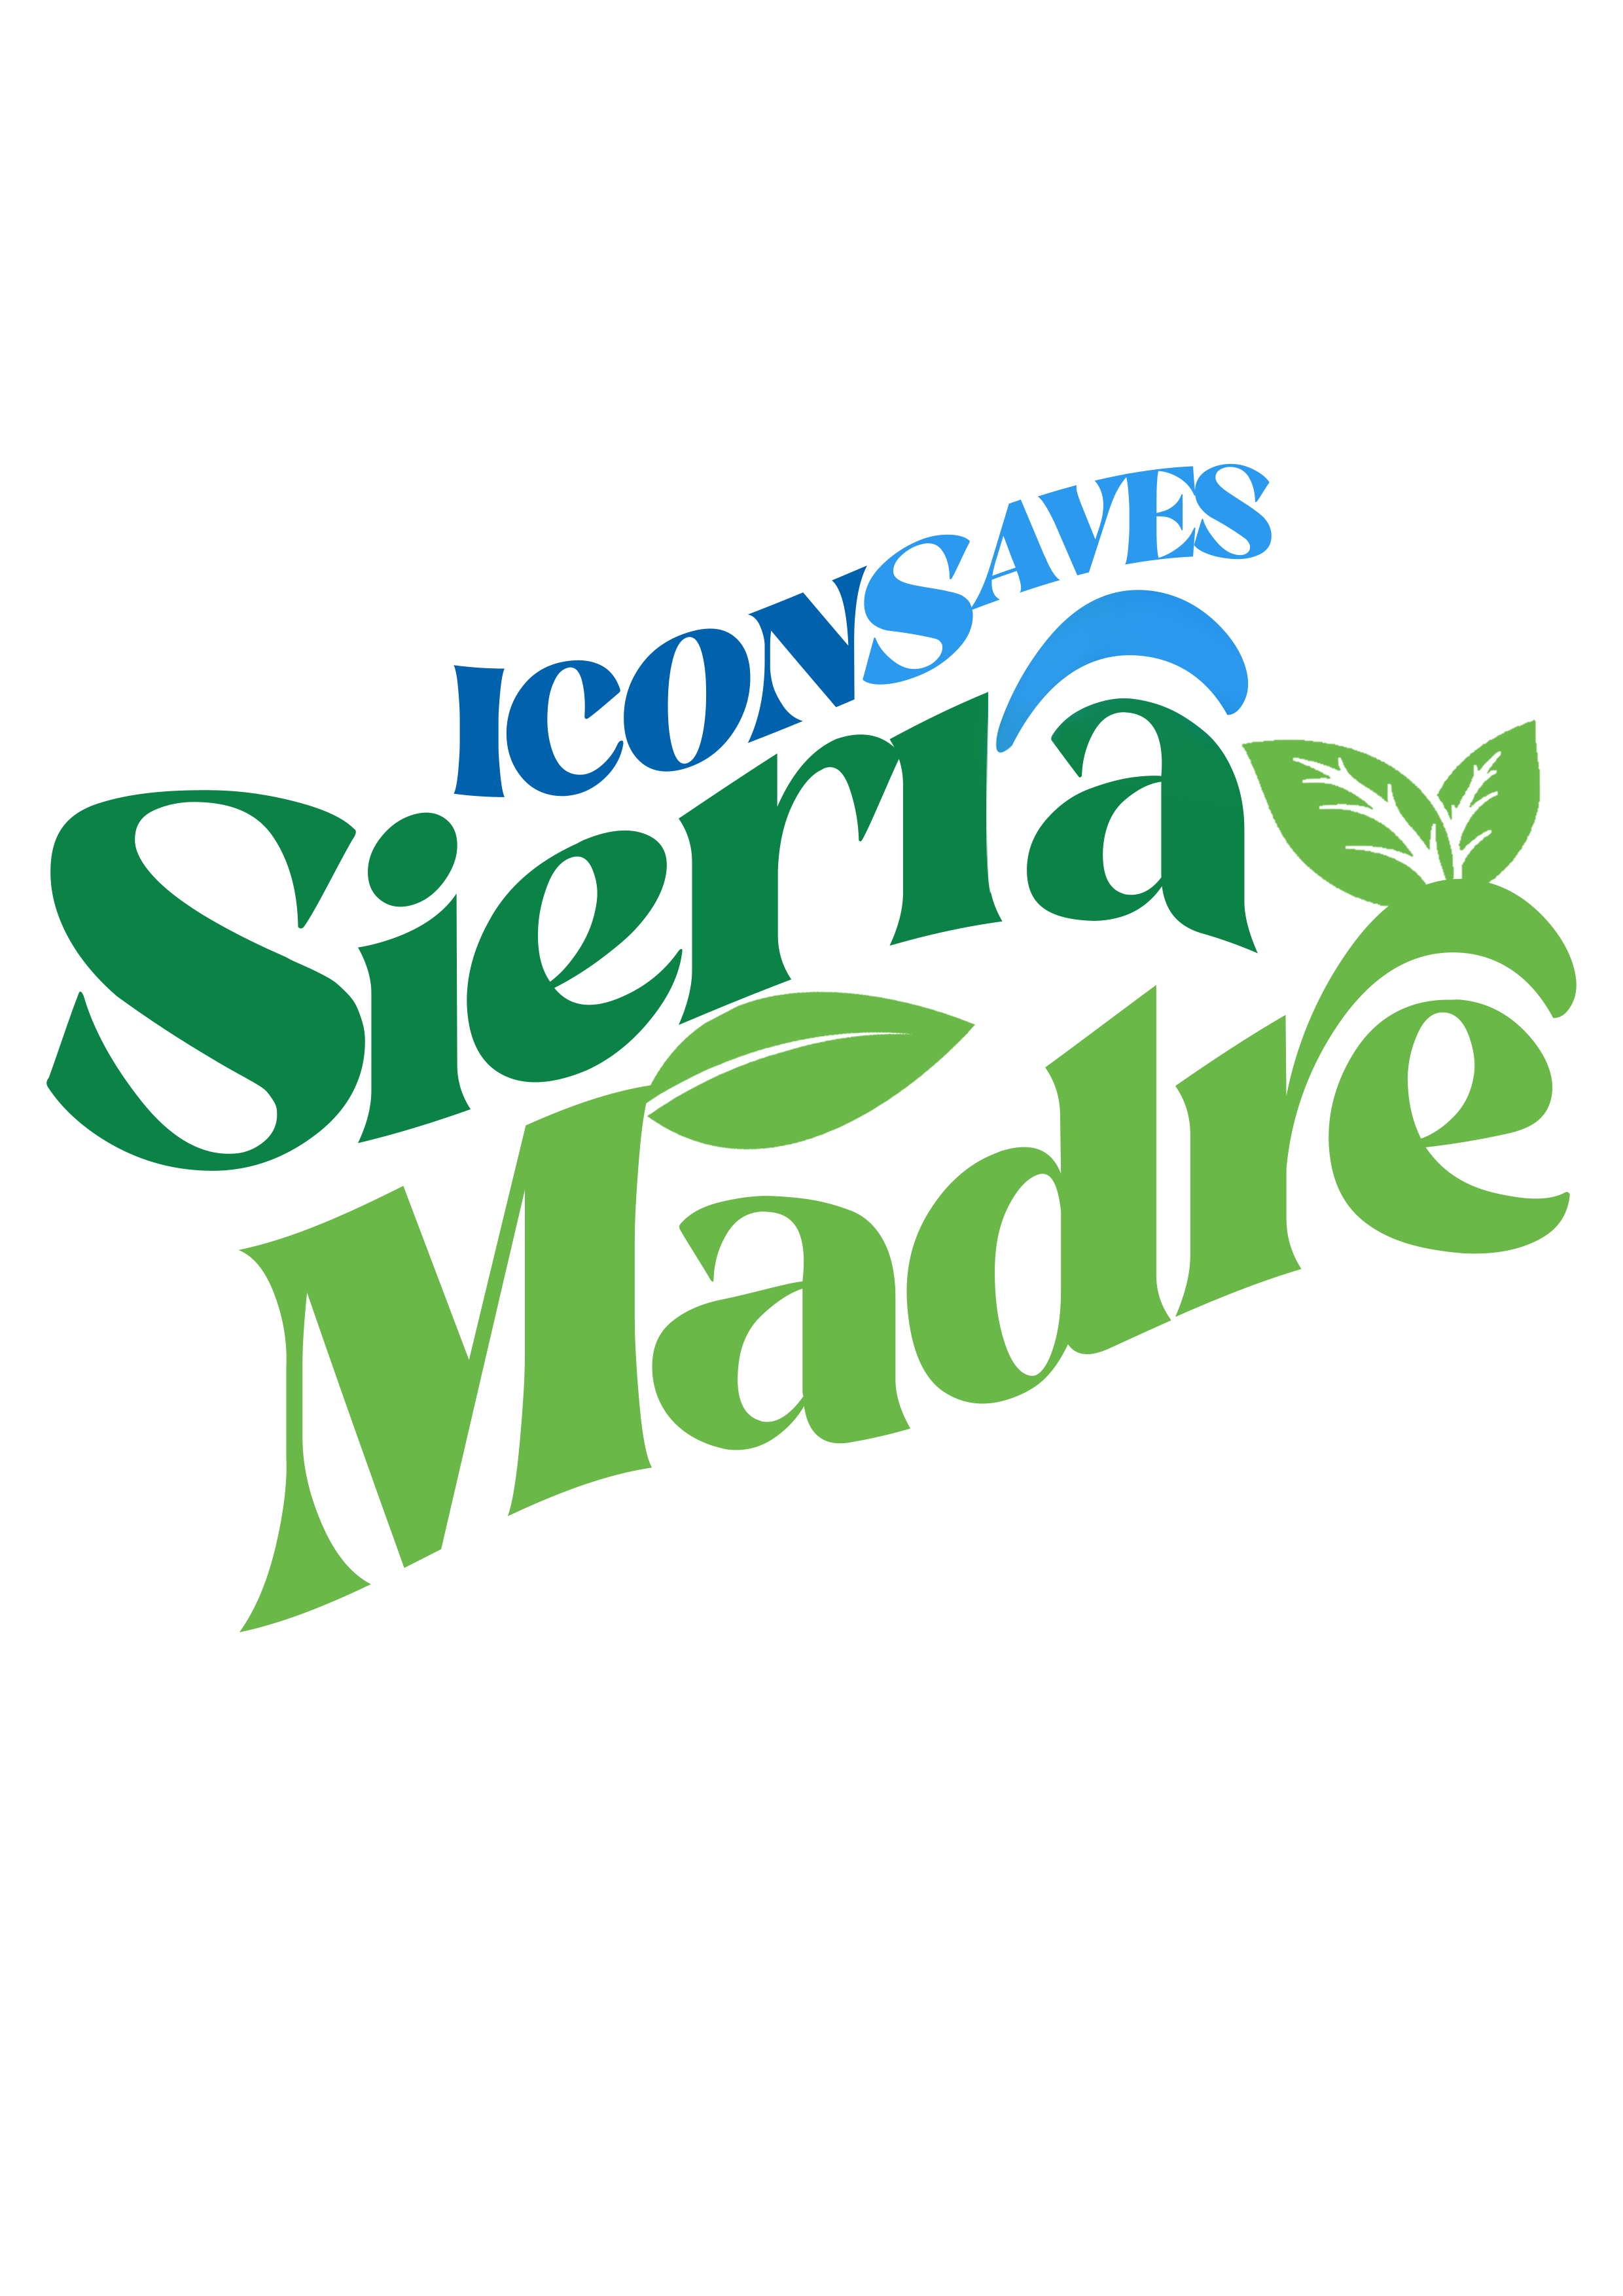 ICONS Save Sierra Madre